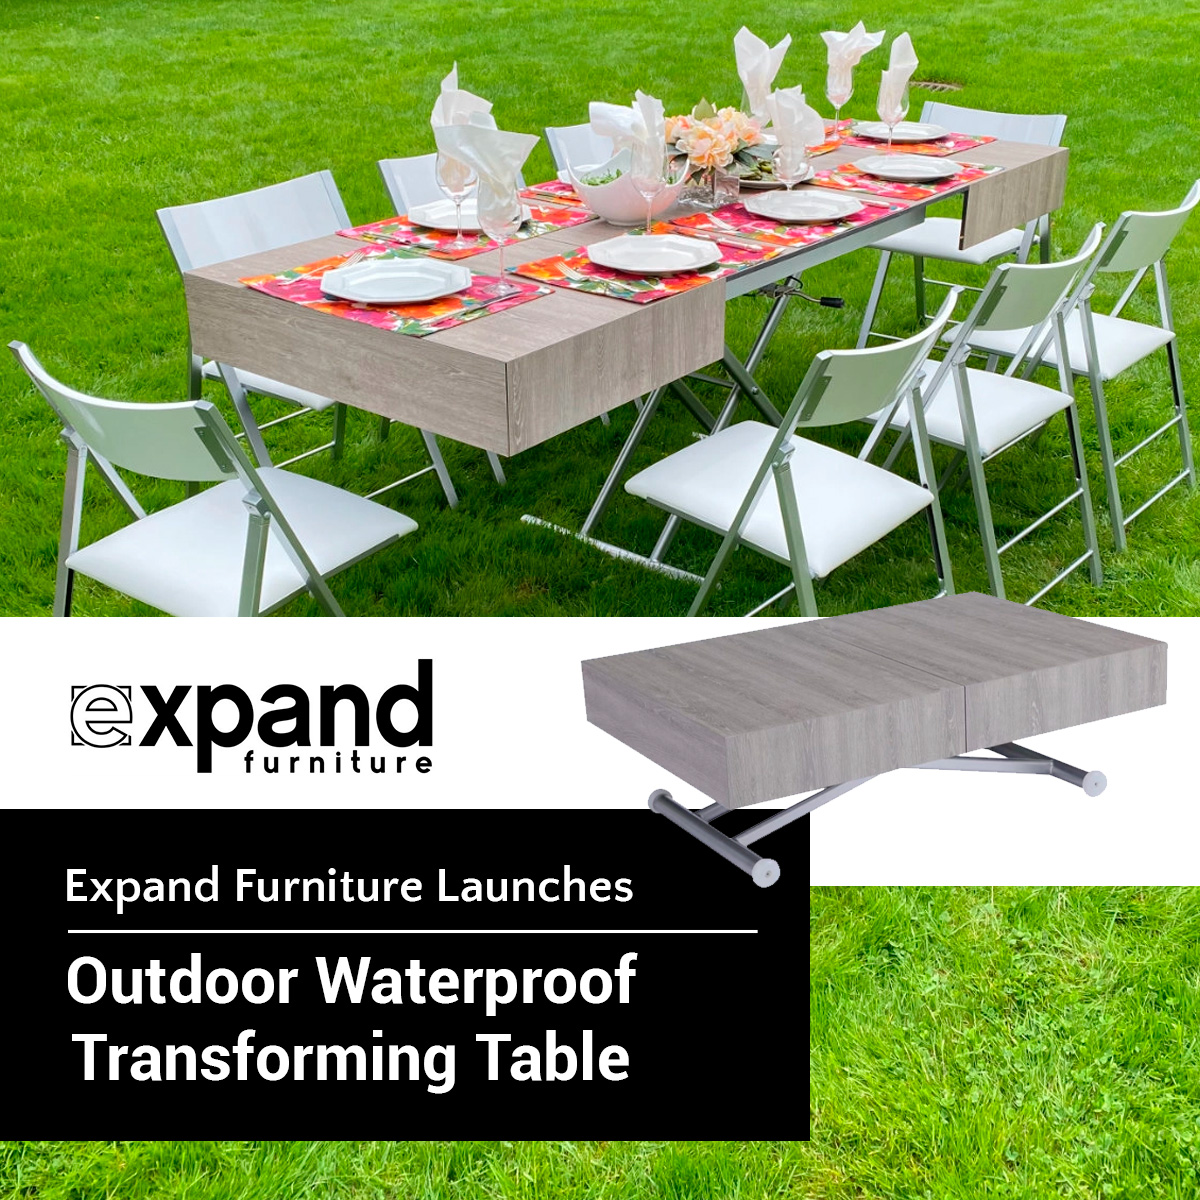 Expand Furniture Launches Outdoor Patio Furniture Line